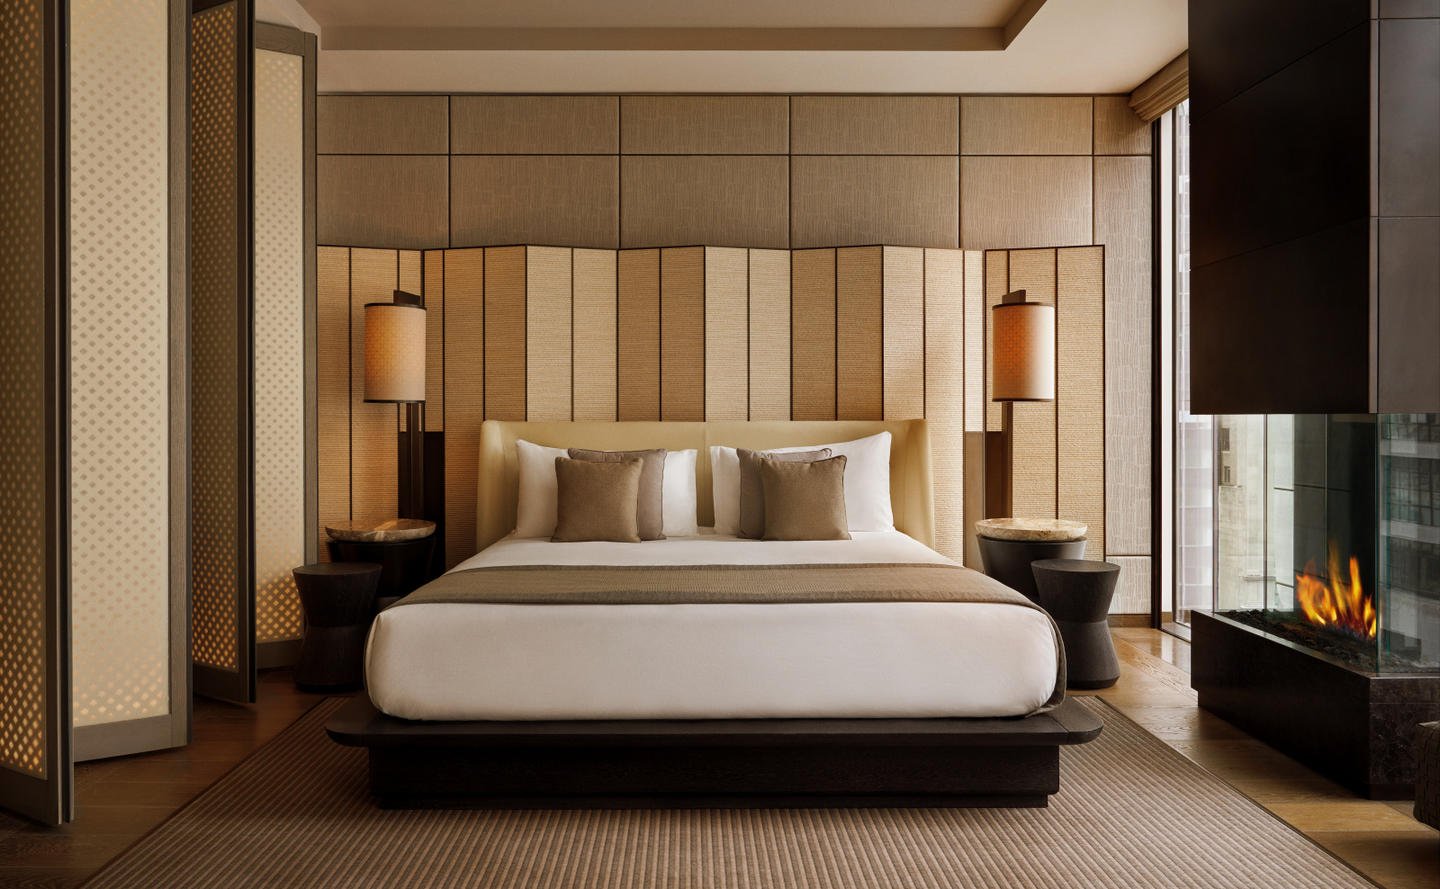 Aman New York, USA - Accommodation, Deluxe Suite 56th Street